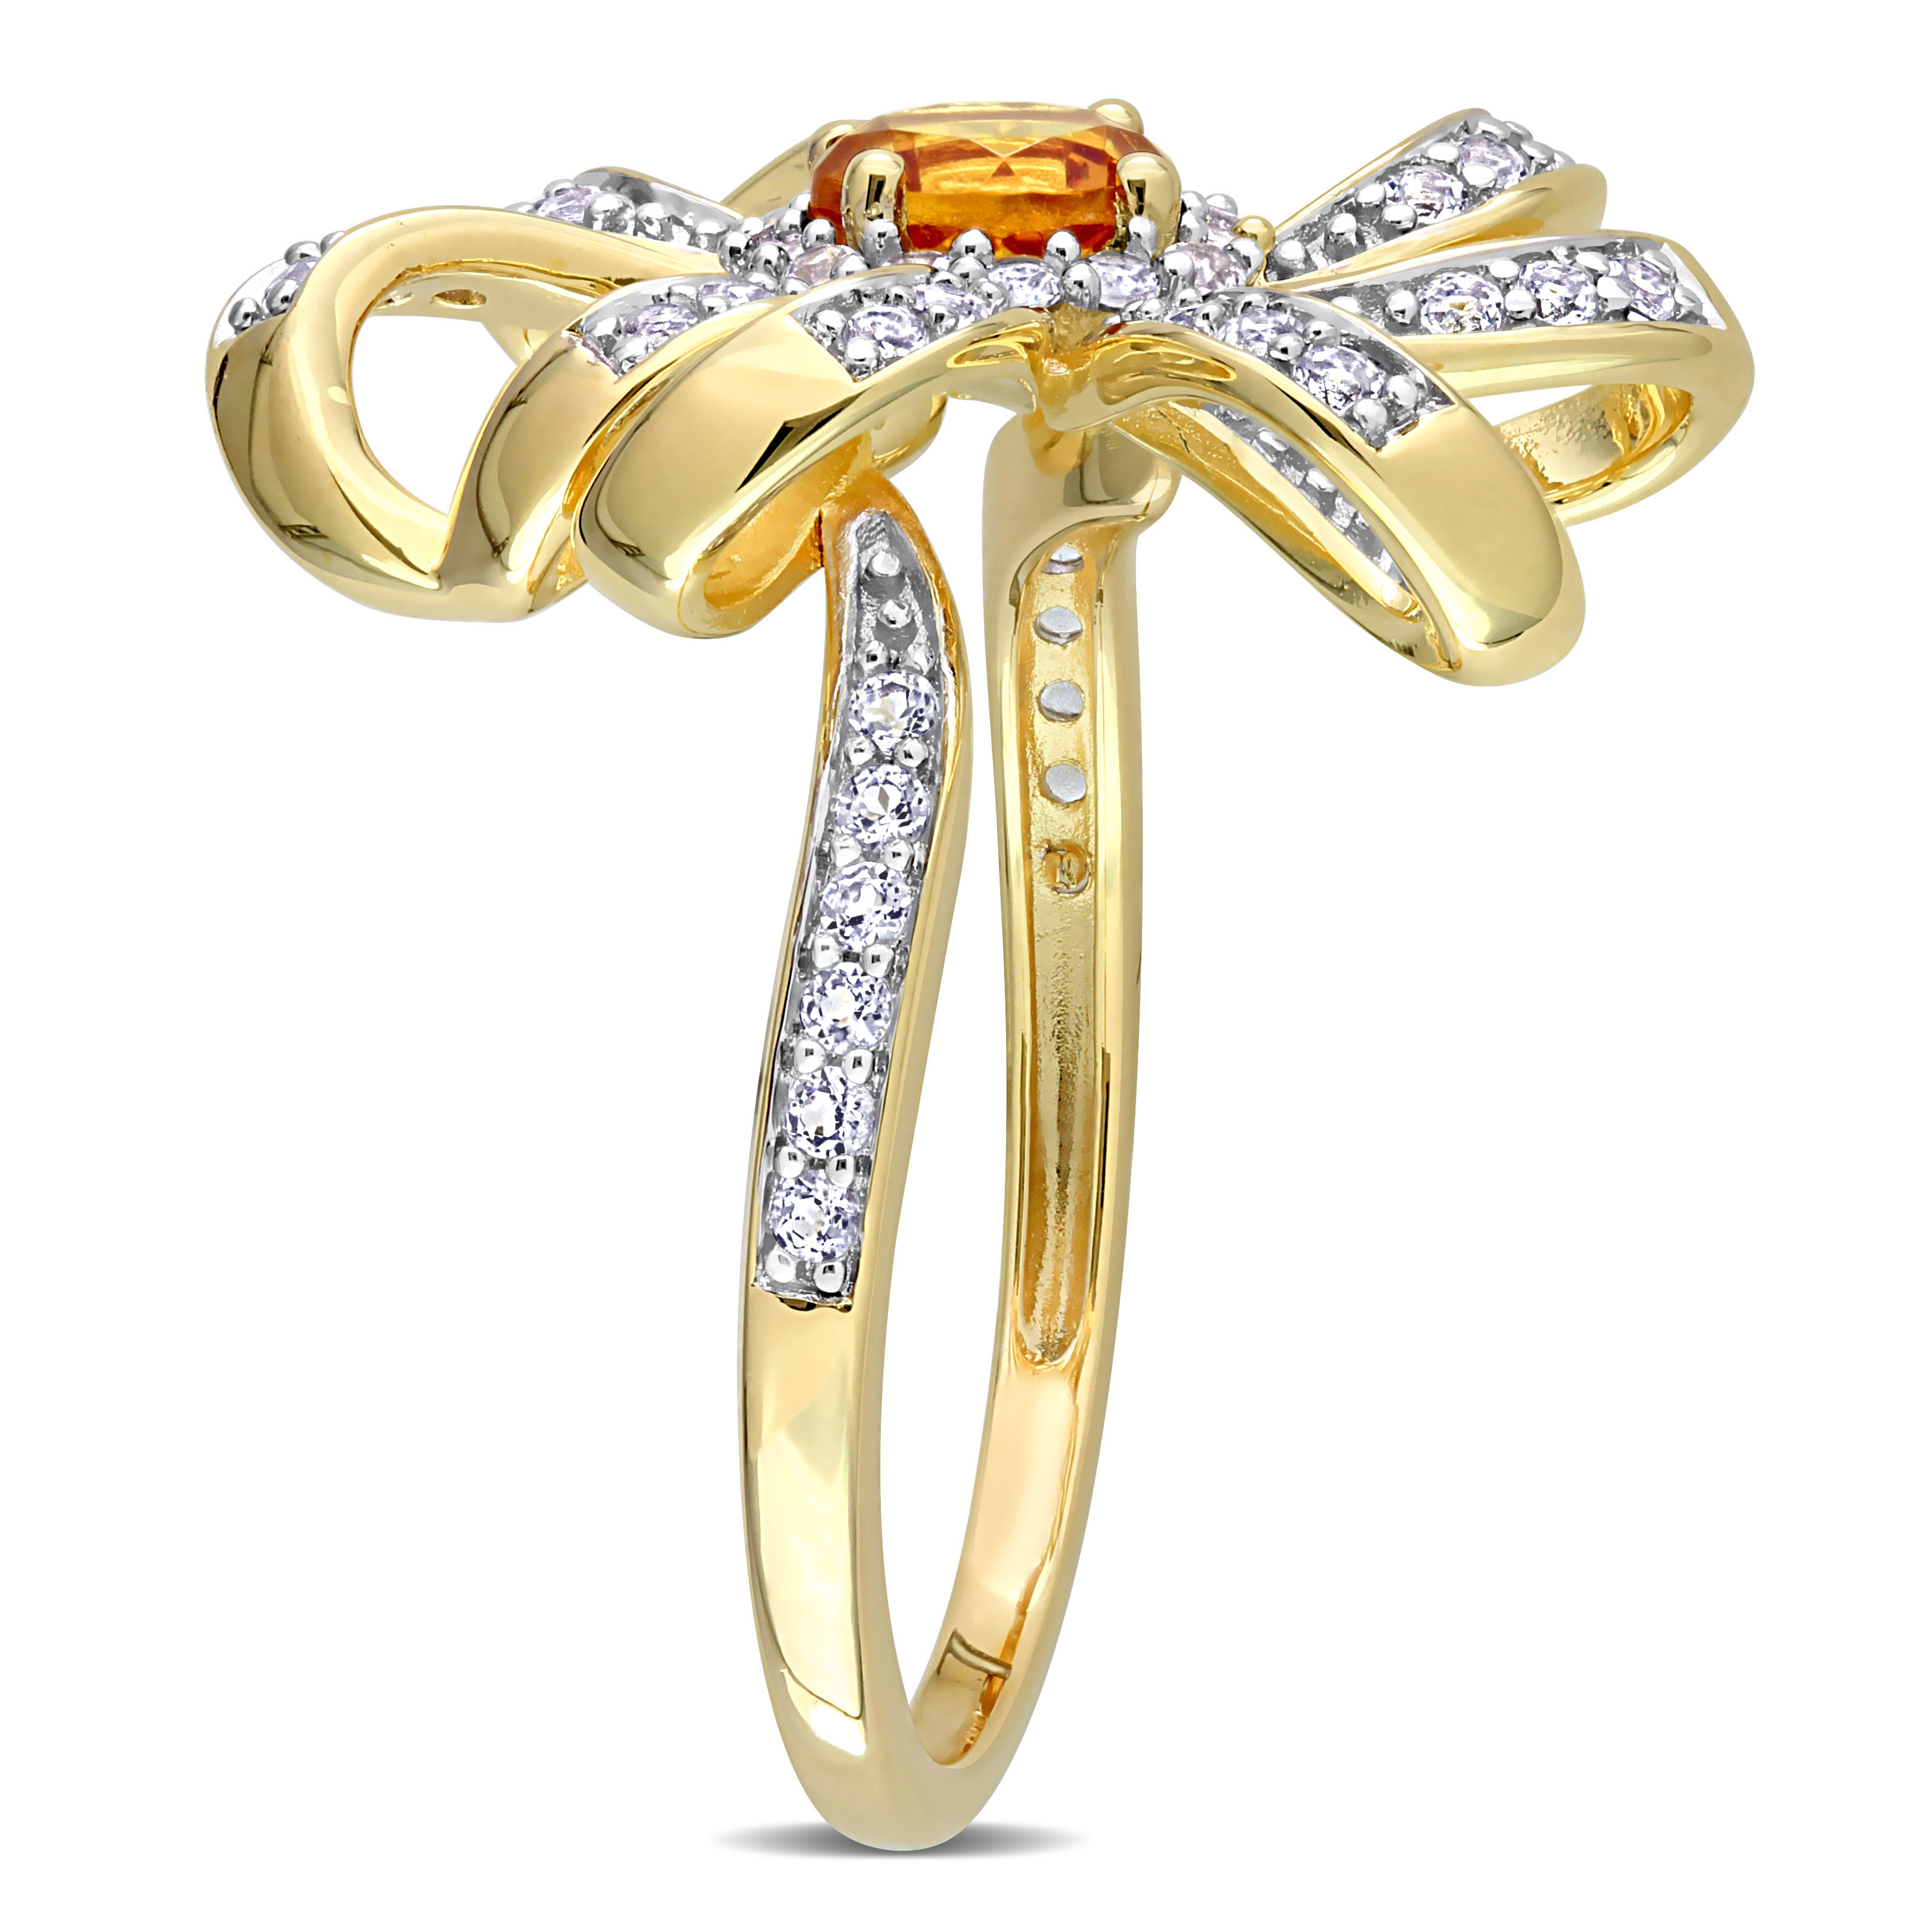 7/8 CT TGW Madeira Citrine and White Topaz Flower Cocktail Ring in 18k Yellow Gold Plated Sterling Silver